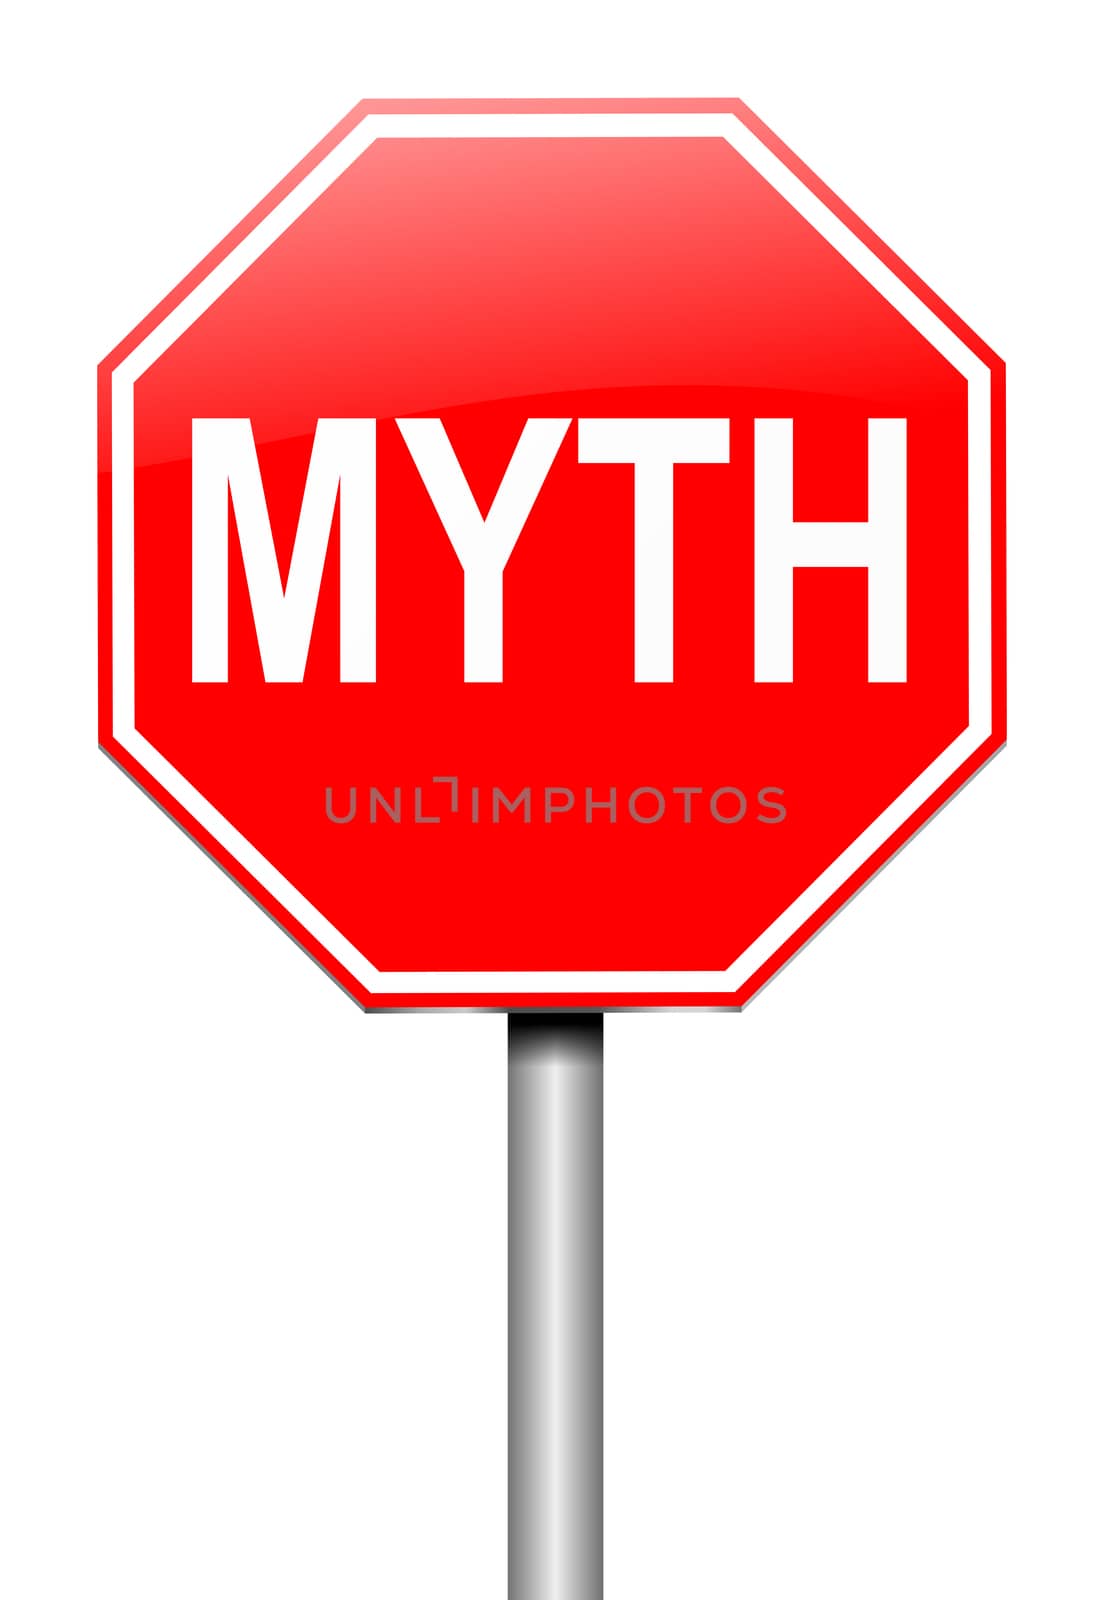 Myth sign concept. by 72soul